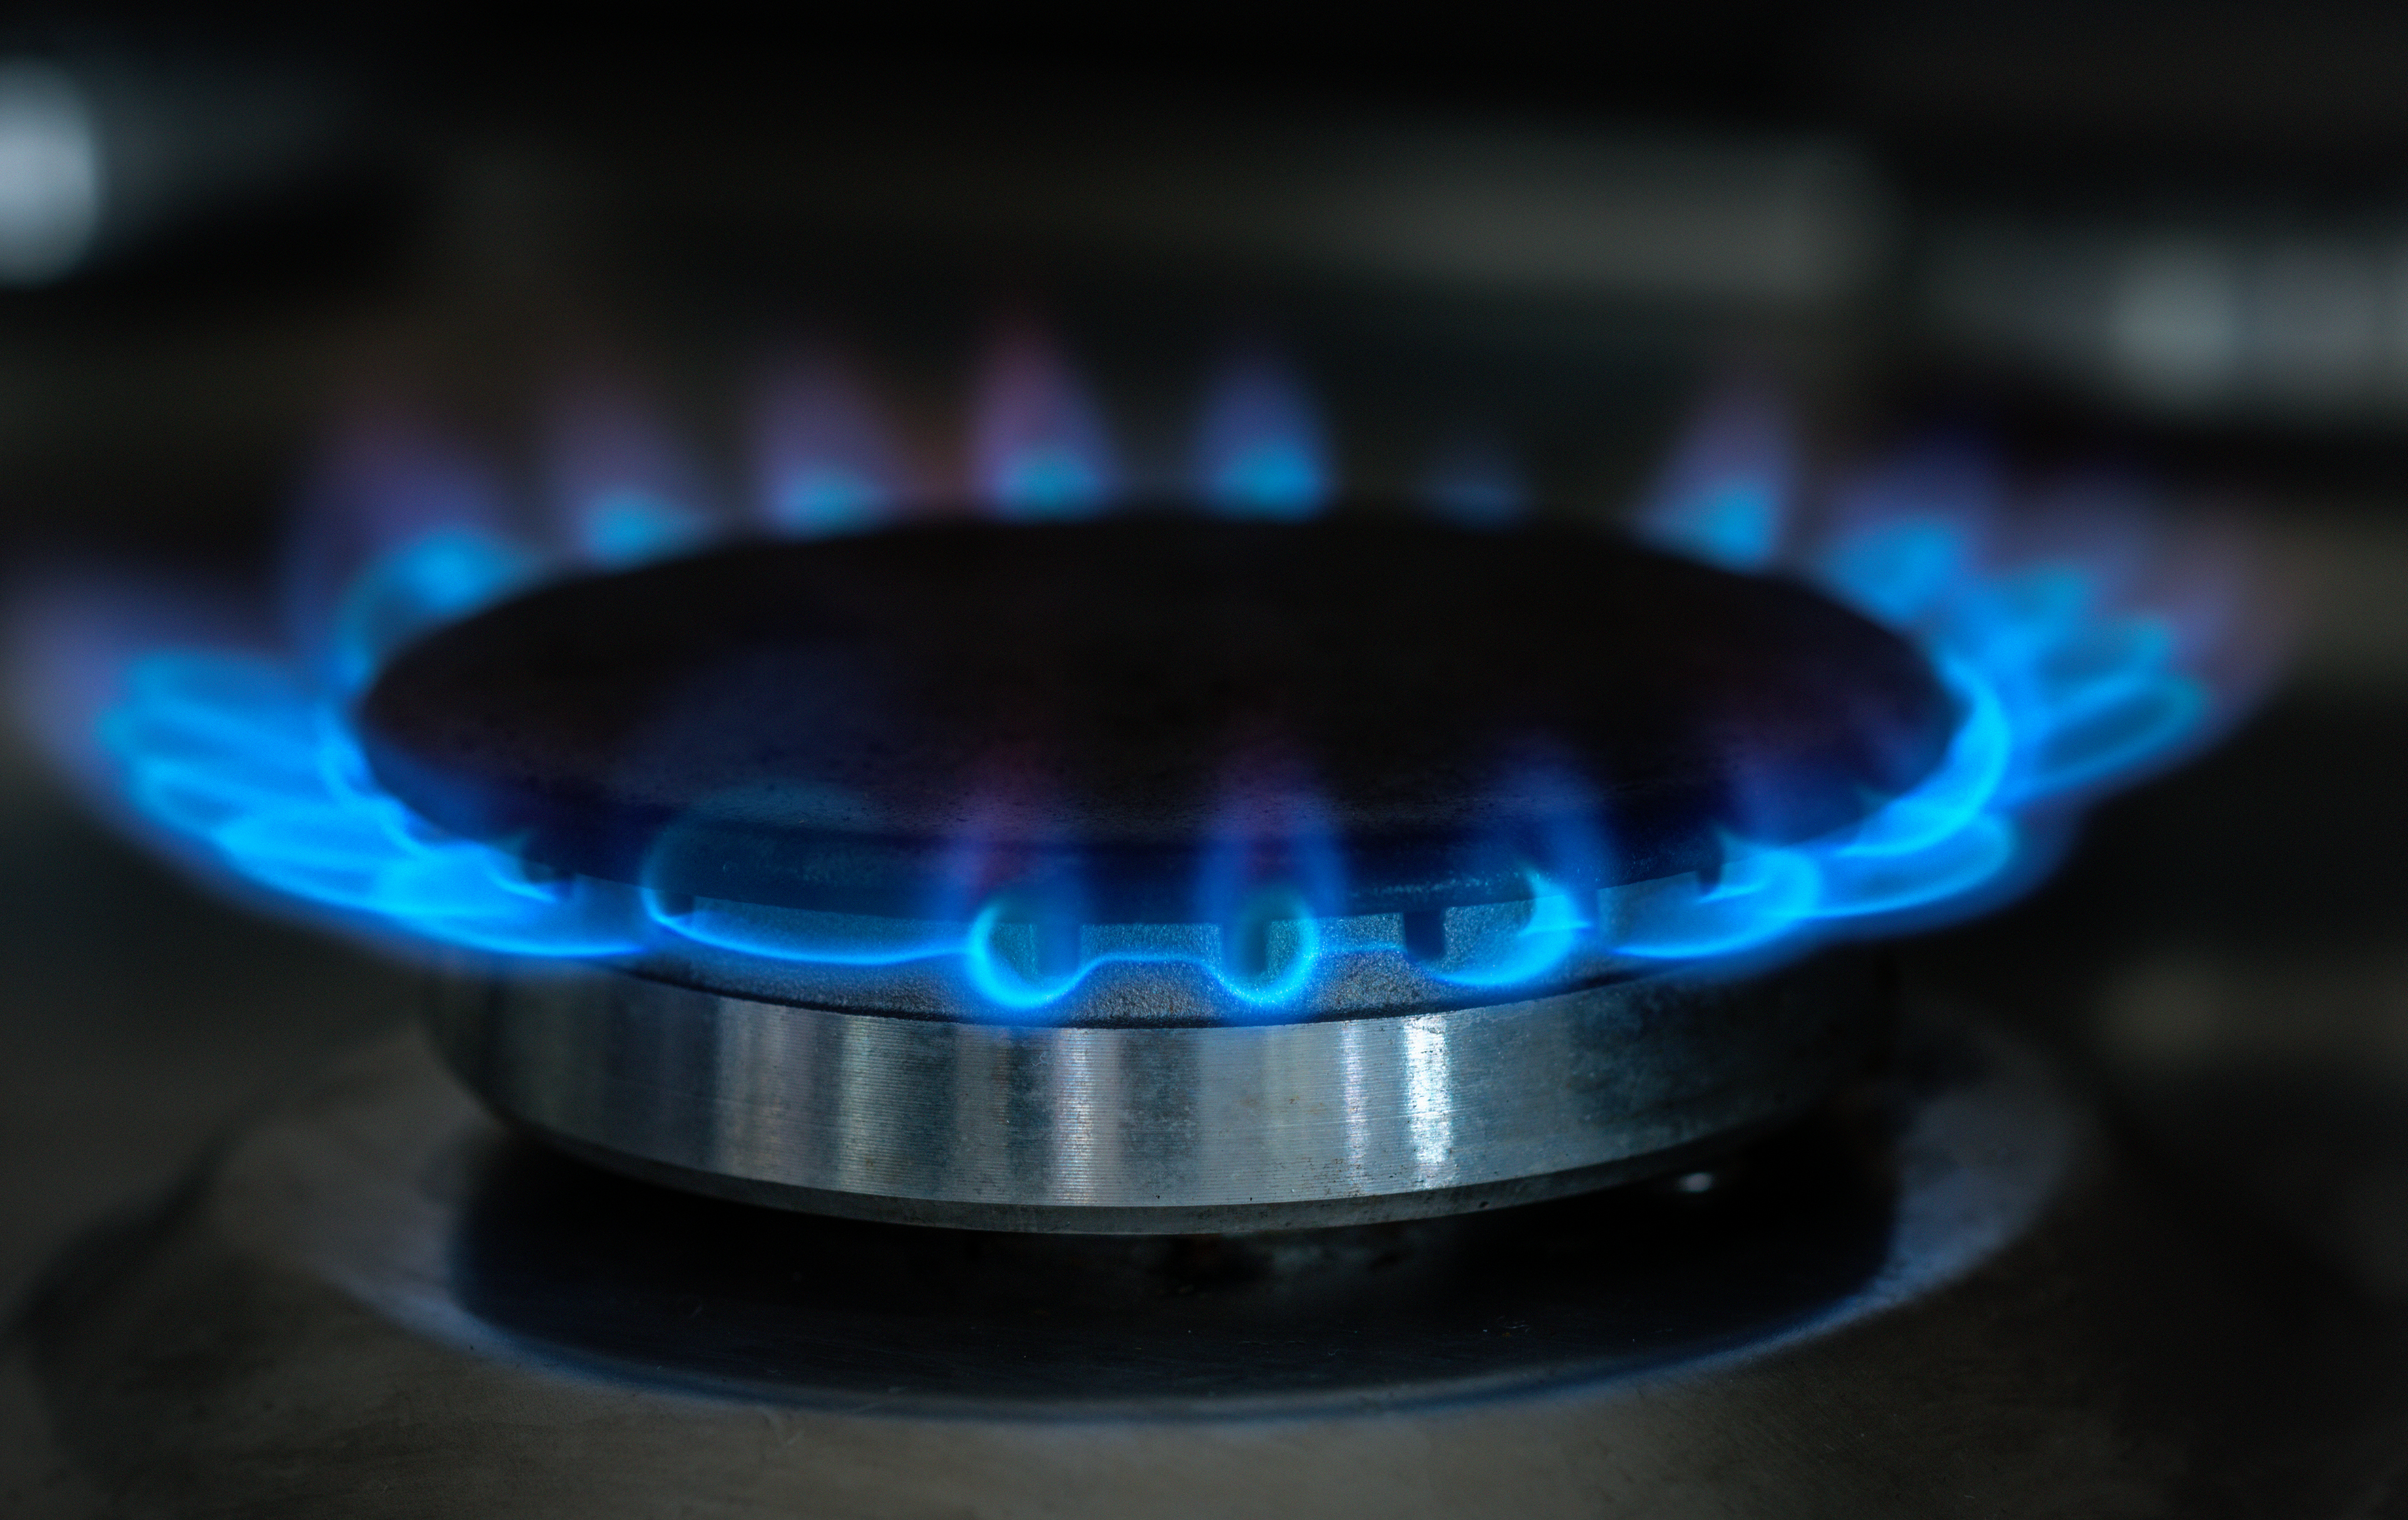 A lit gas hob with blue flames